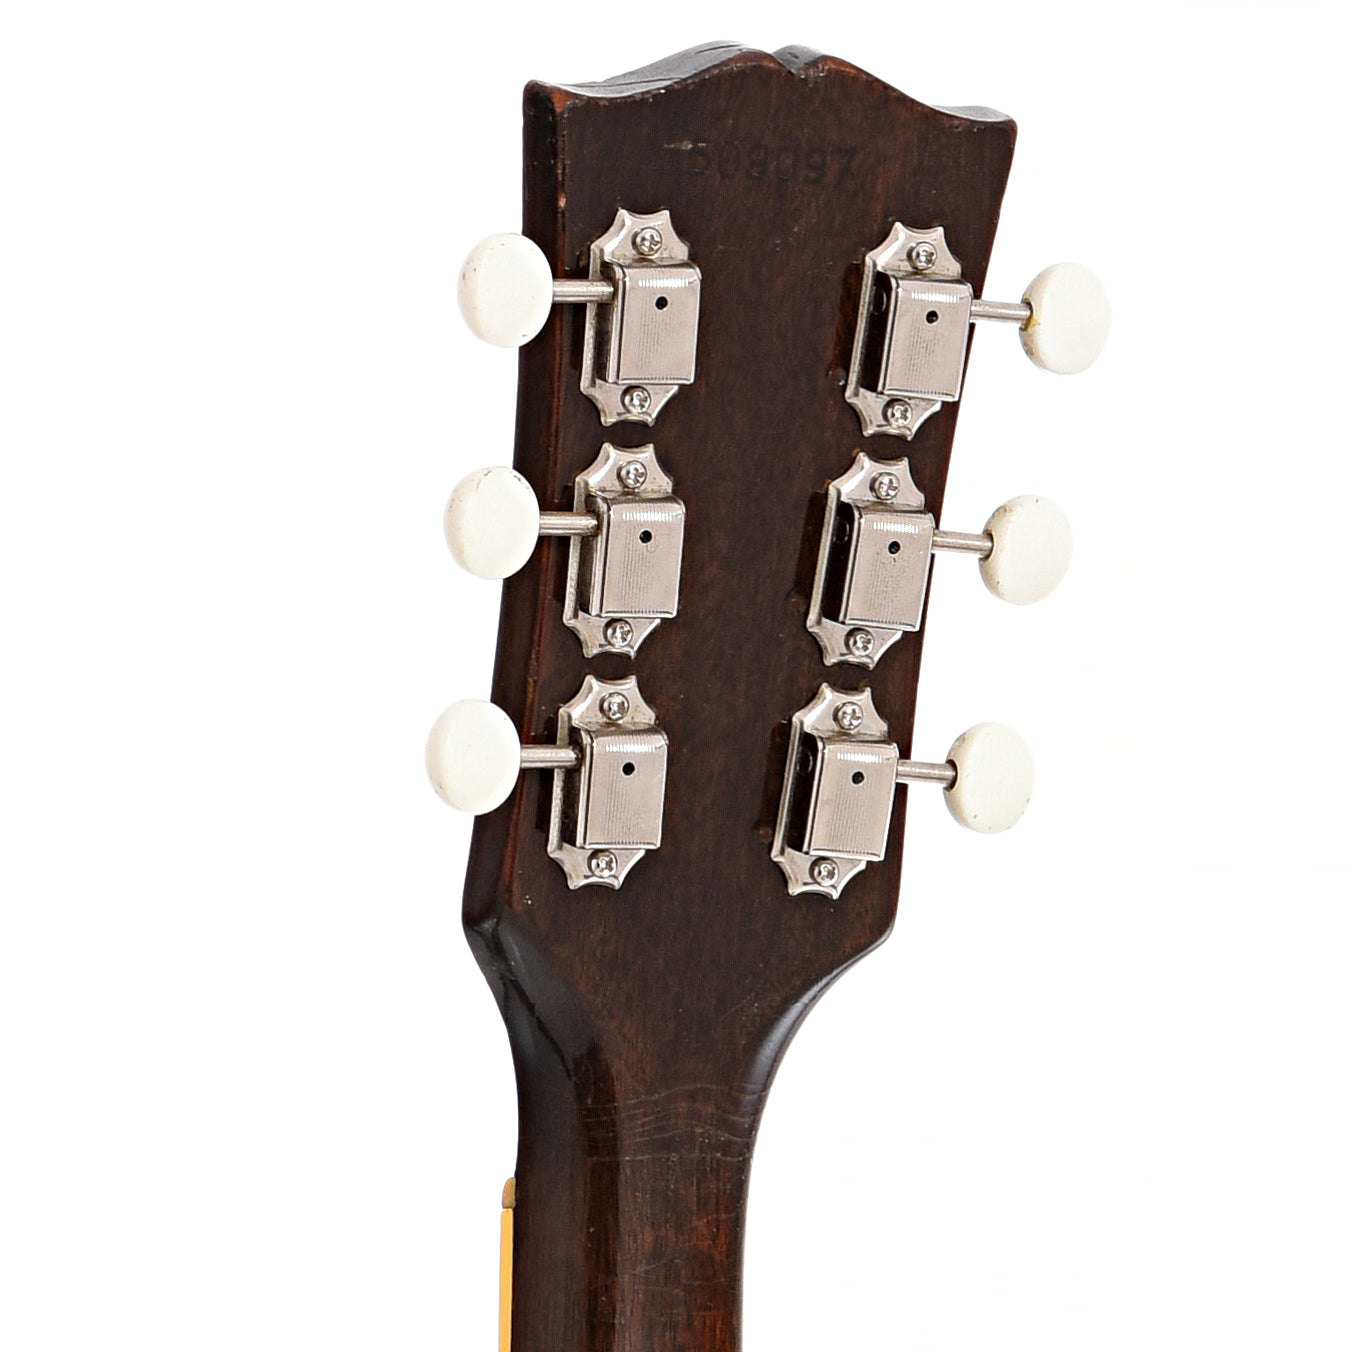 Back headstock of Gibson ES-330TD Hollow Body Electric Guitar (c.1968)